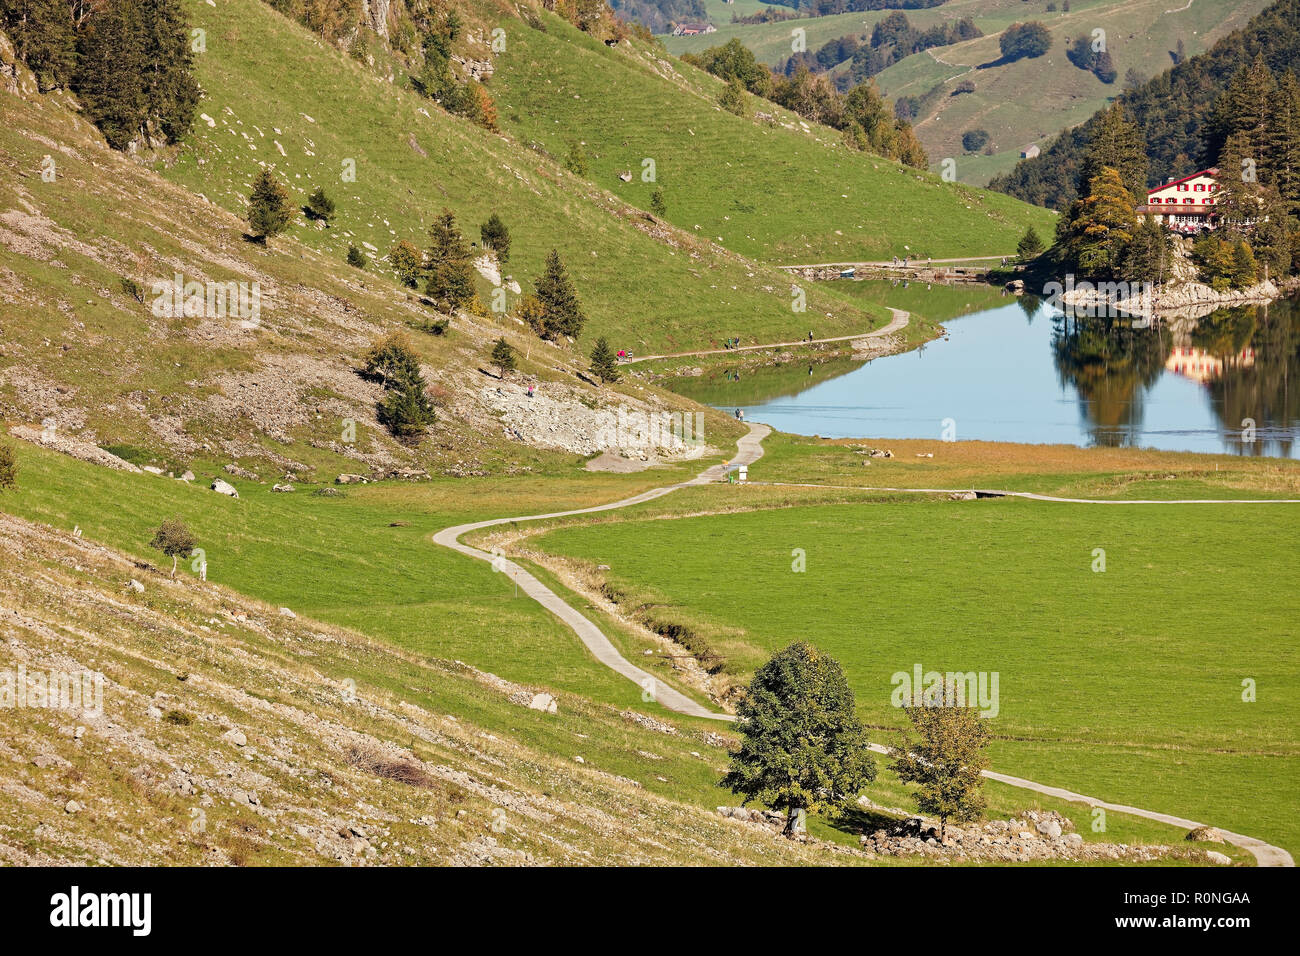 Sunny views of pastures, Seealpsee Inn, Forelle Inn from Oberstofel by Seealpsee lake in Alpstein, Appenzell Alps, Switzerland Stock Photo